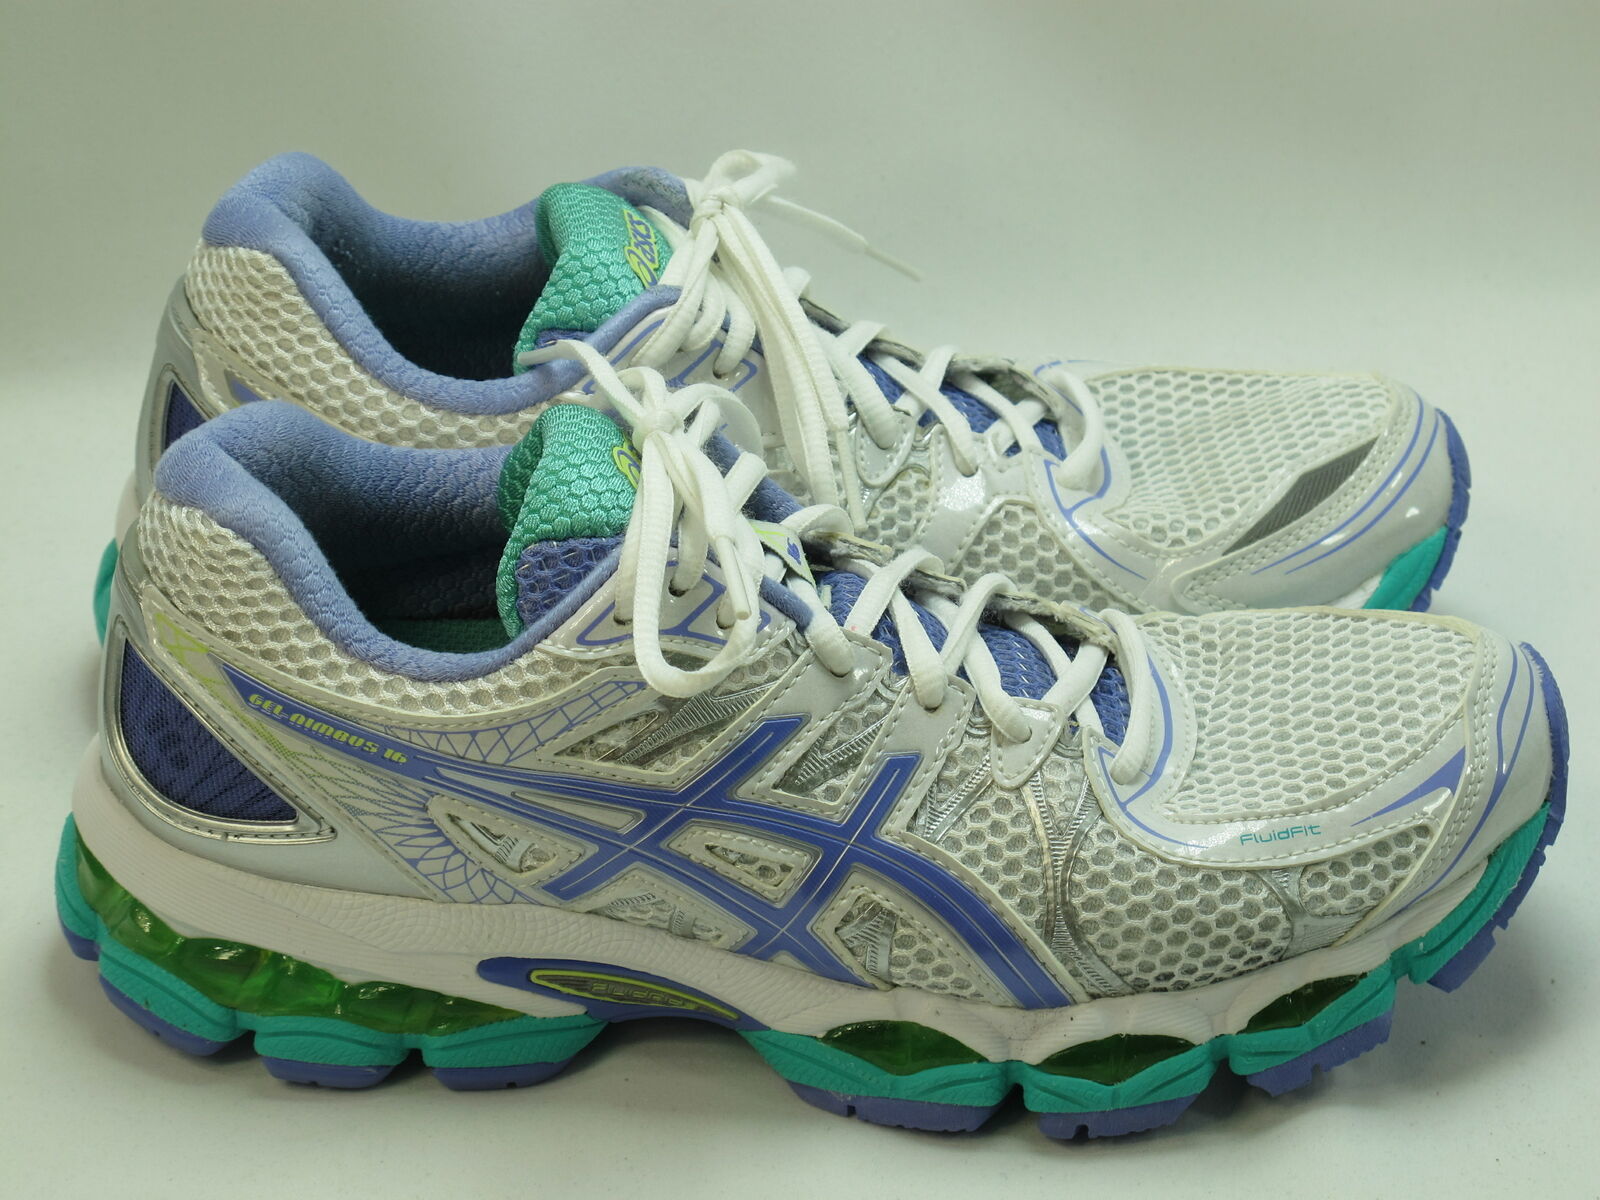 Asics gel nimbus 25. ASICS Nimbus 25. ASICS Nimbus 25 Womens Running Shoes Blue Turquoise.